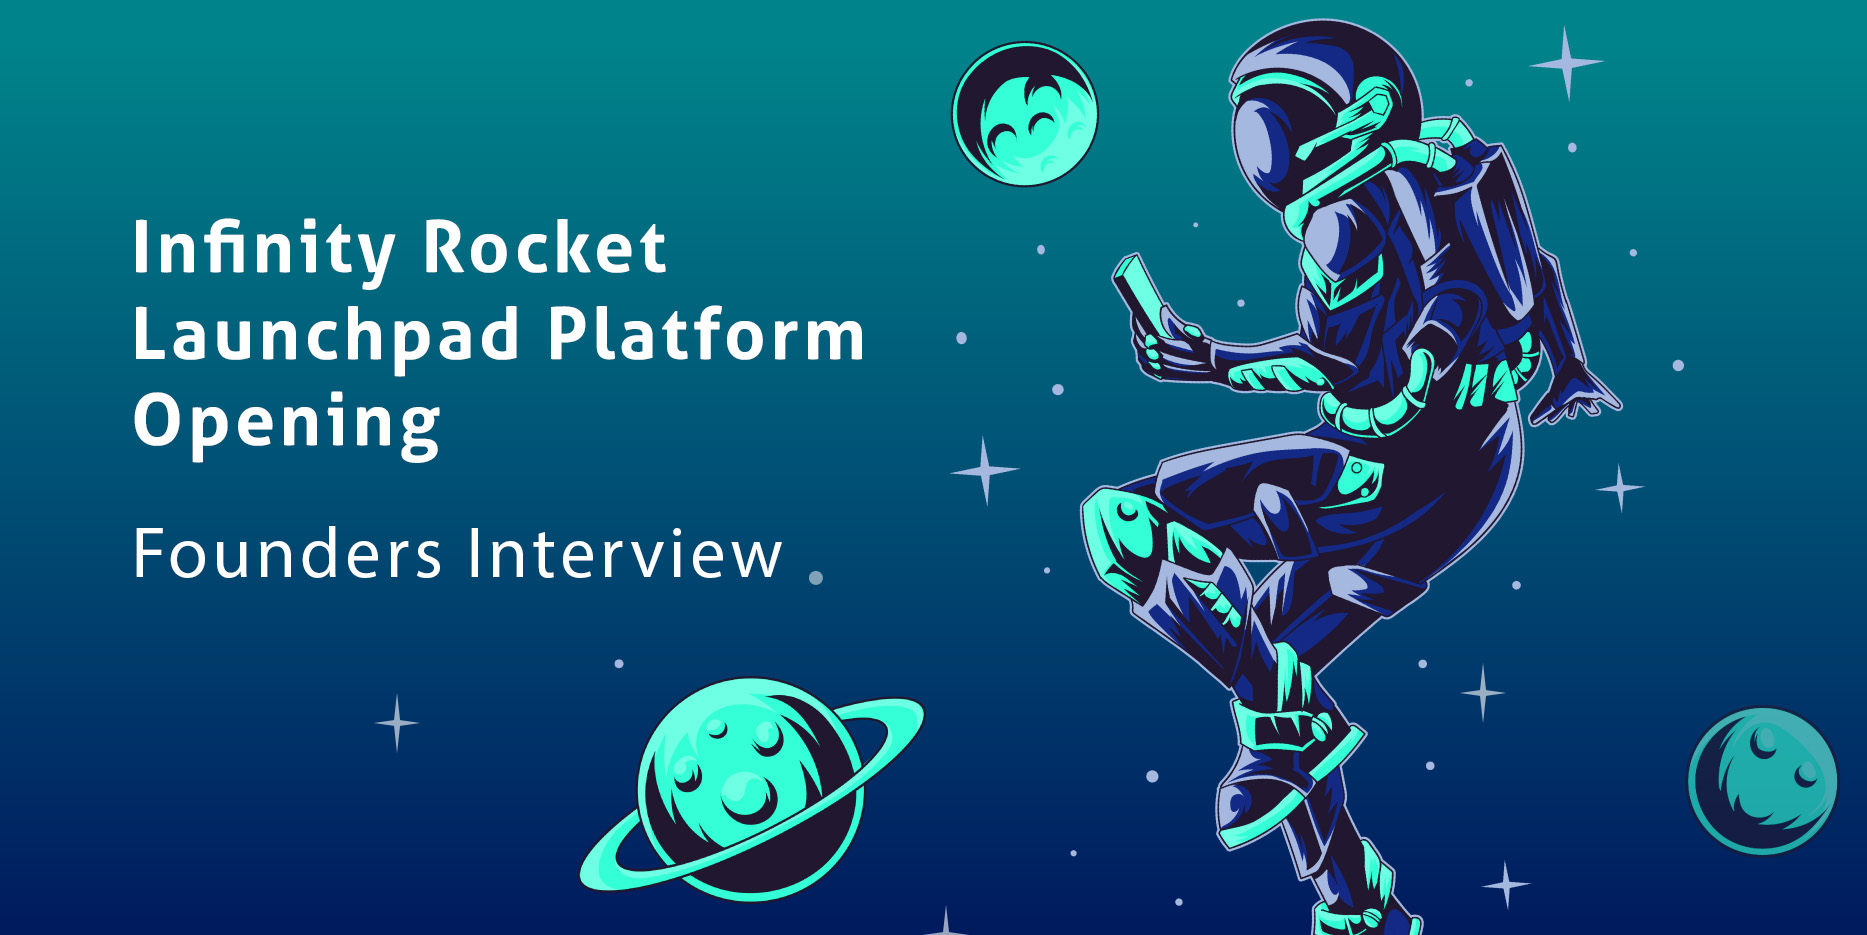 Infinity Rocket founders about the opening of the Infinity Rocket Launchpad Platform